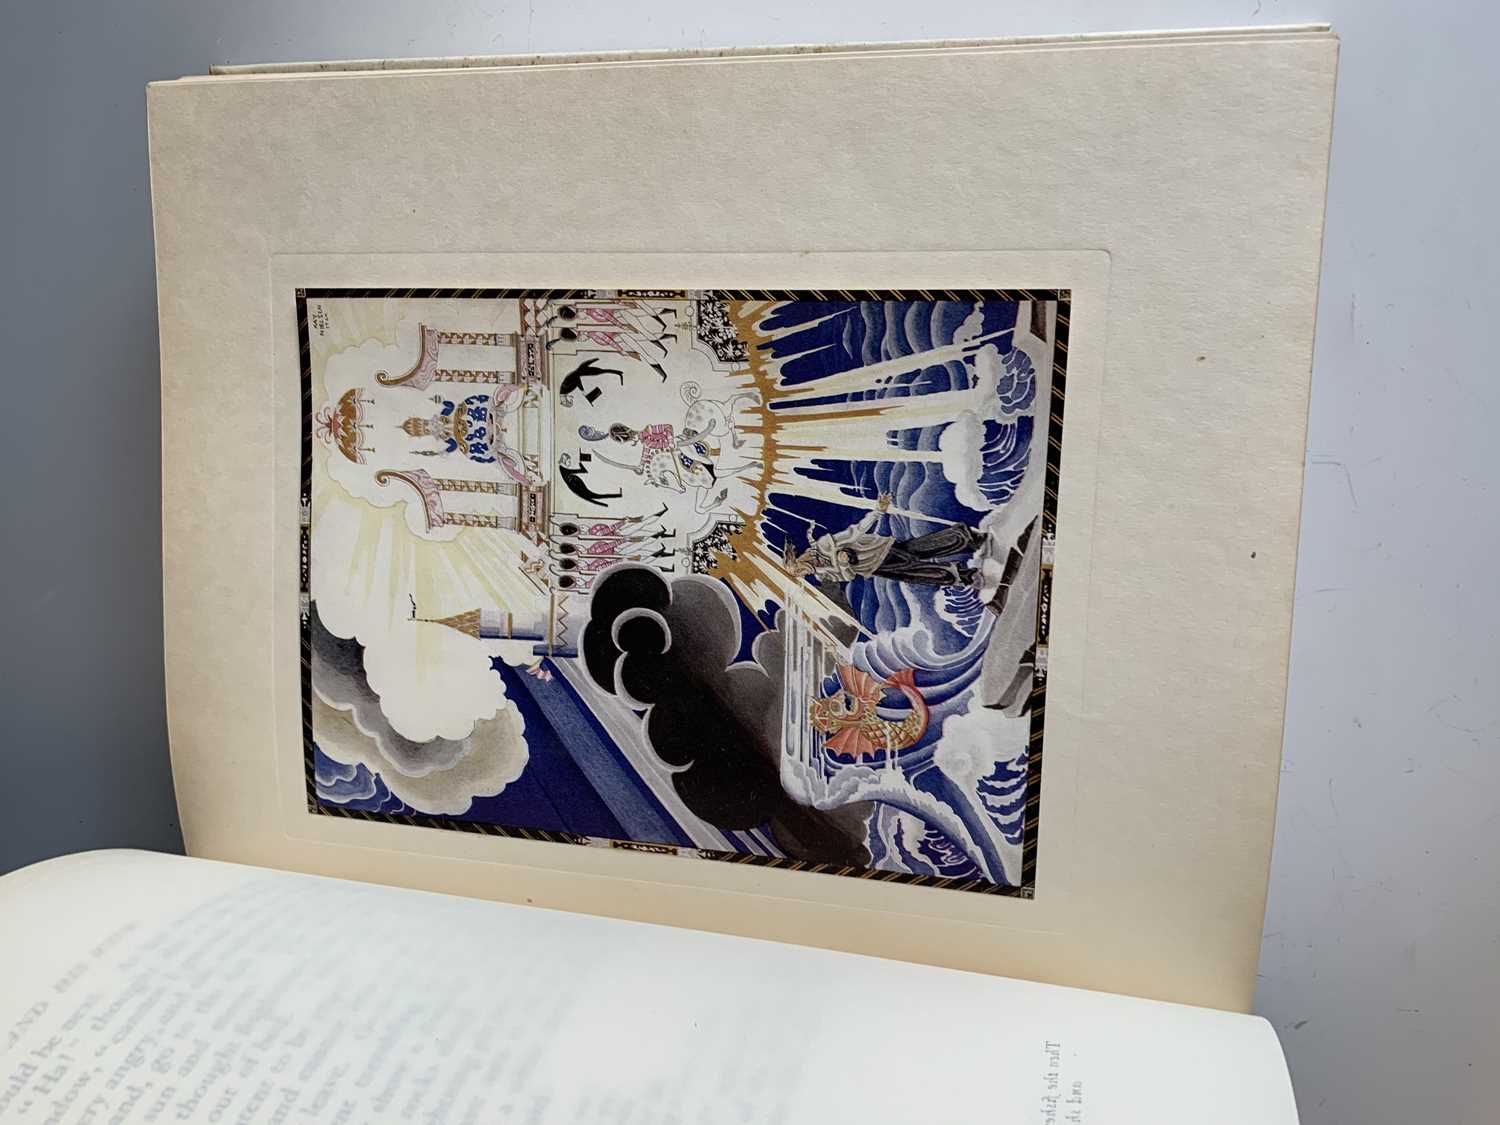 KAY NIELSEN ILLUSTRATIONS. "Hansel and Gretel, and other stories by the brothers Grimm." signed by - Image 11 of 14